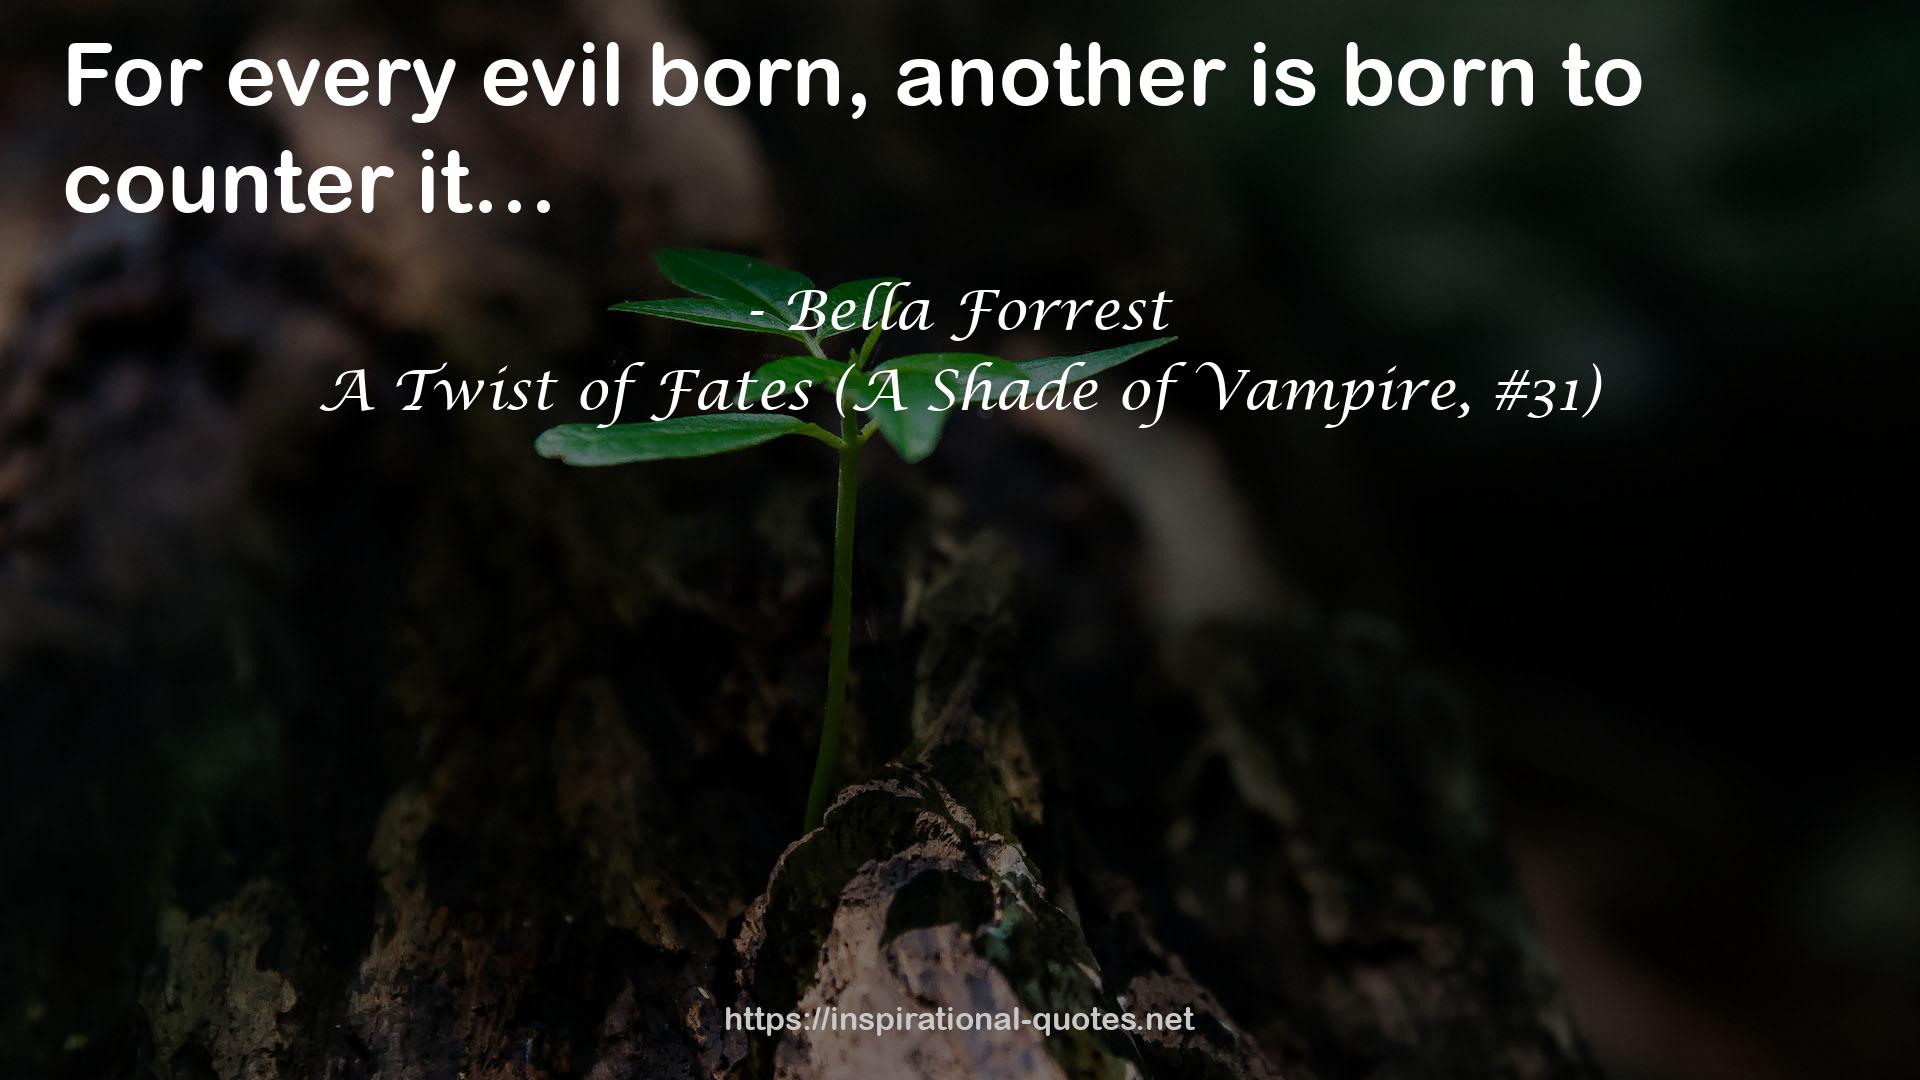 A Twist of Fates (A Shade of Vampire, #31) QUOTES